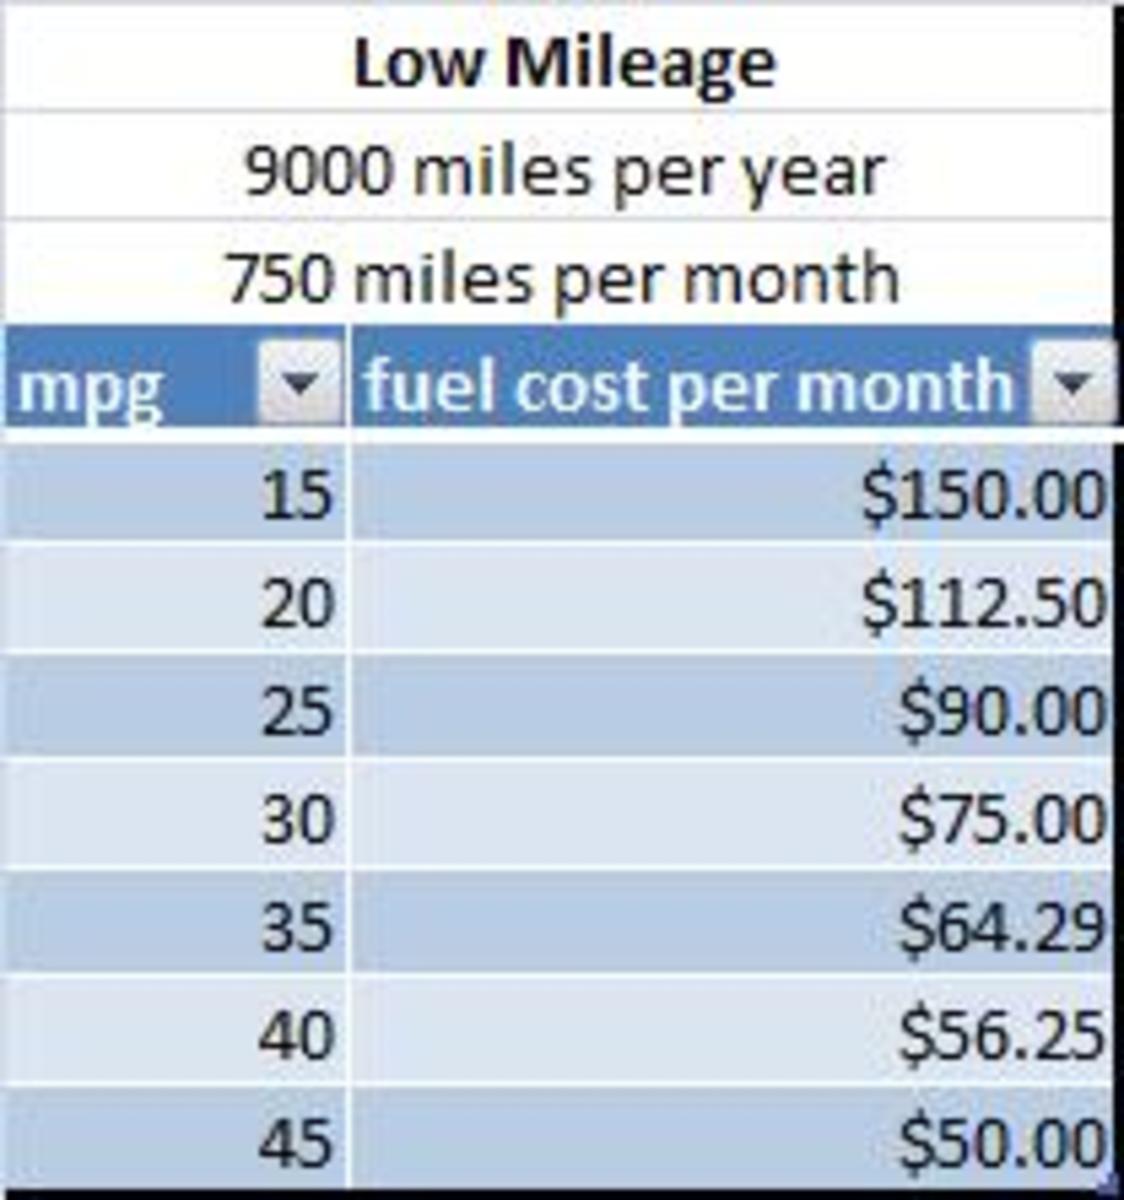 Table of fuel cost per month vs mpg for low mileage